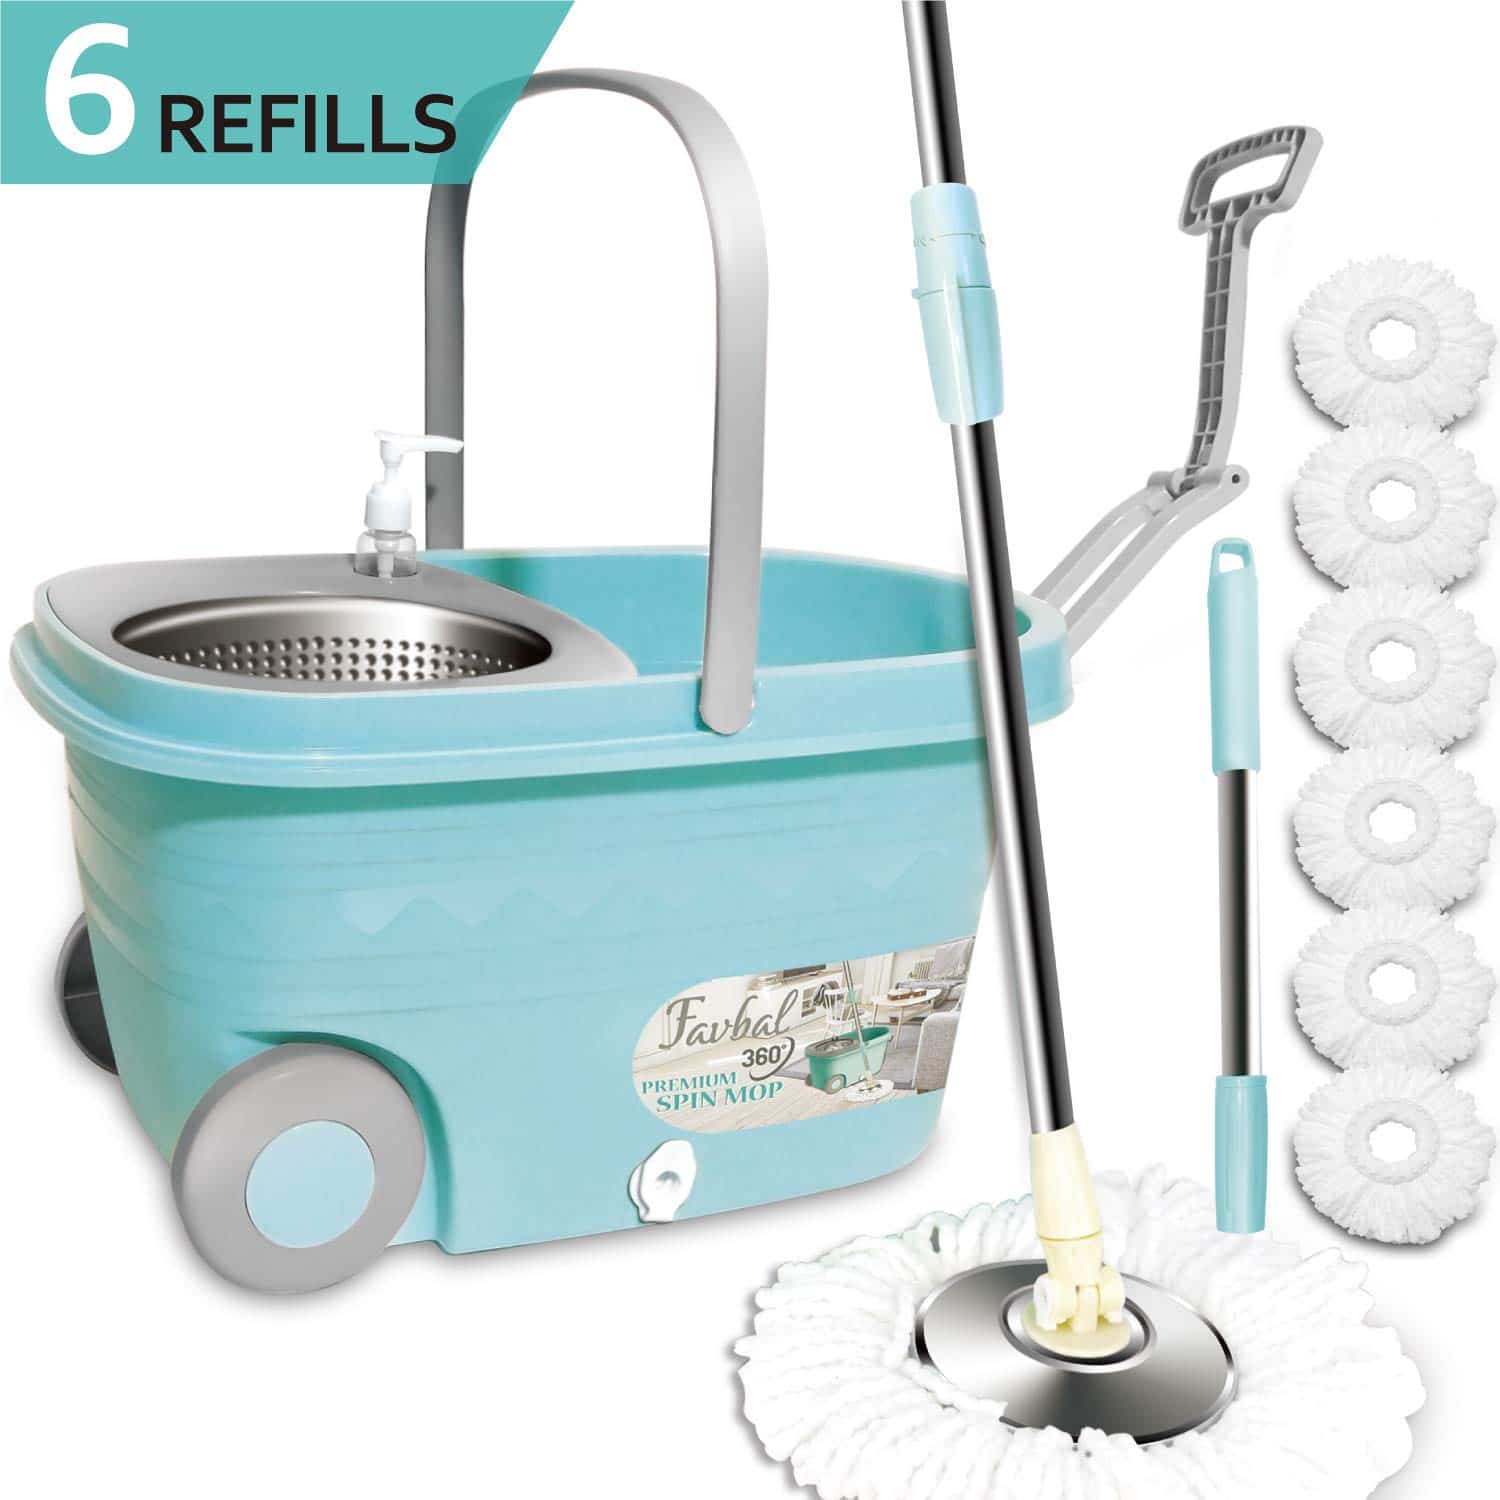 Top 10 Best Spin Mops and Buckets in 2020 Reviews Buyer’s Guide